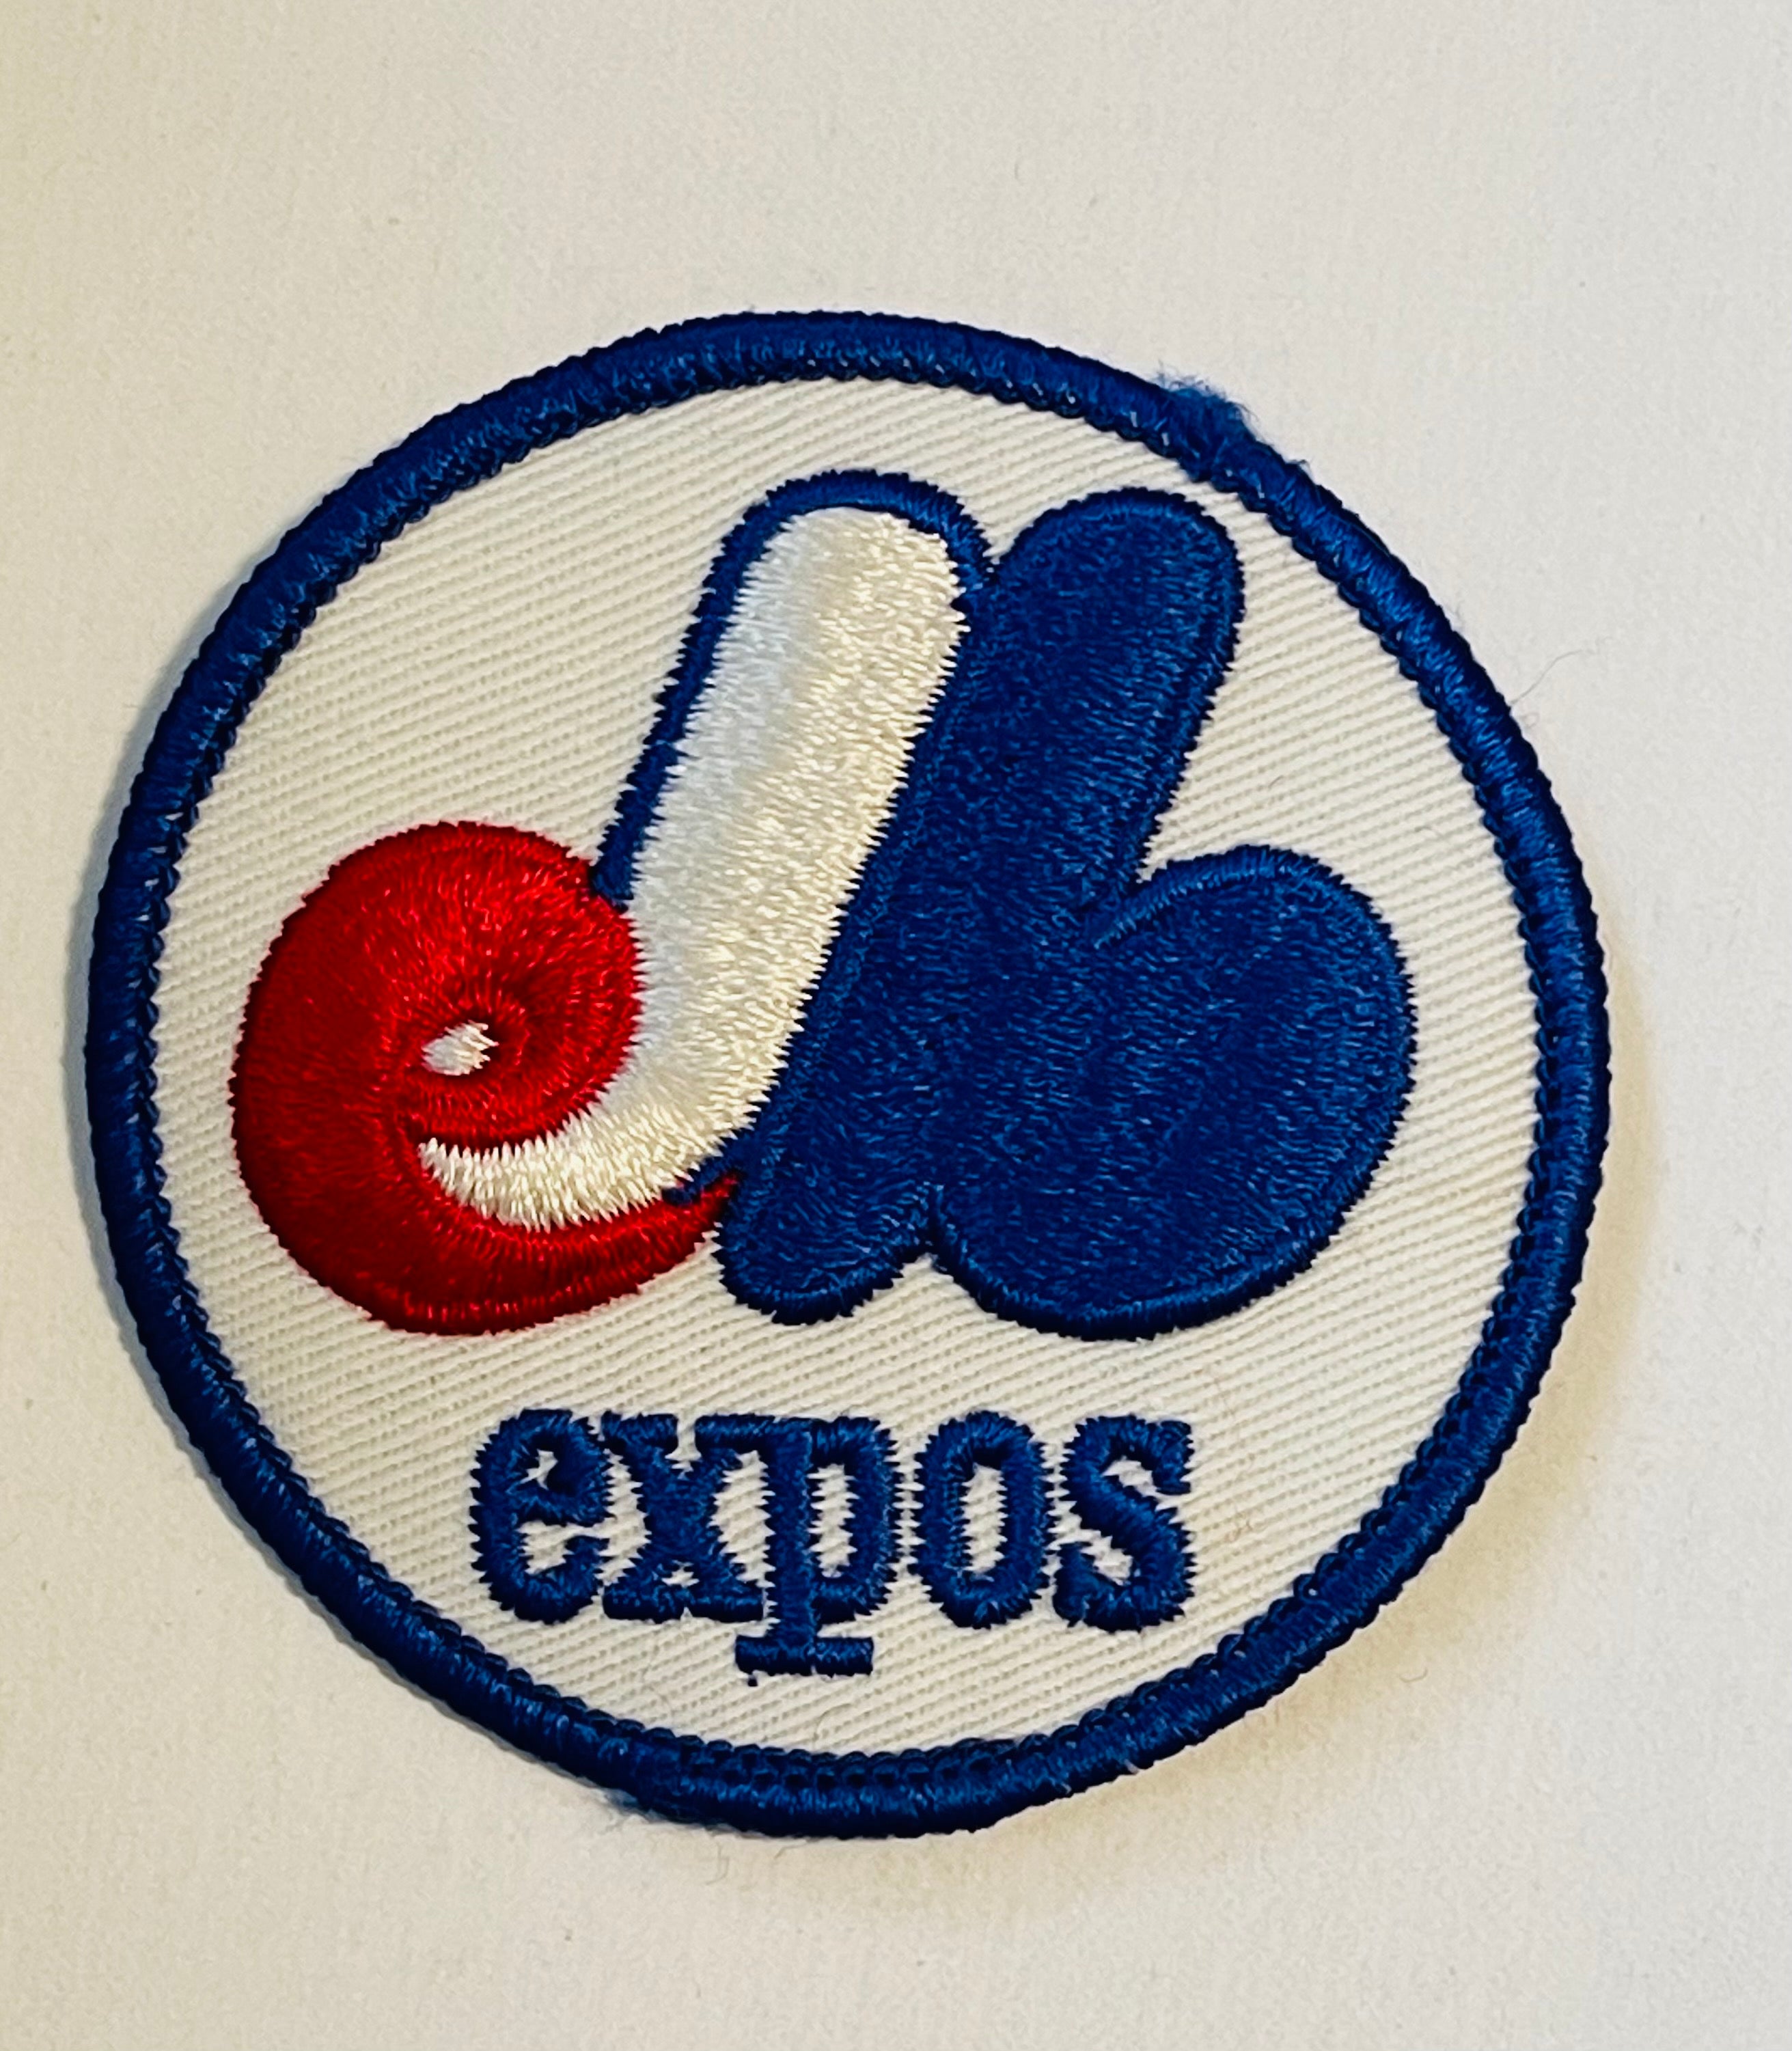 Montreal Expos baseball vintage 3 inch patch 1990s